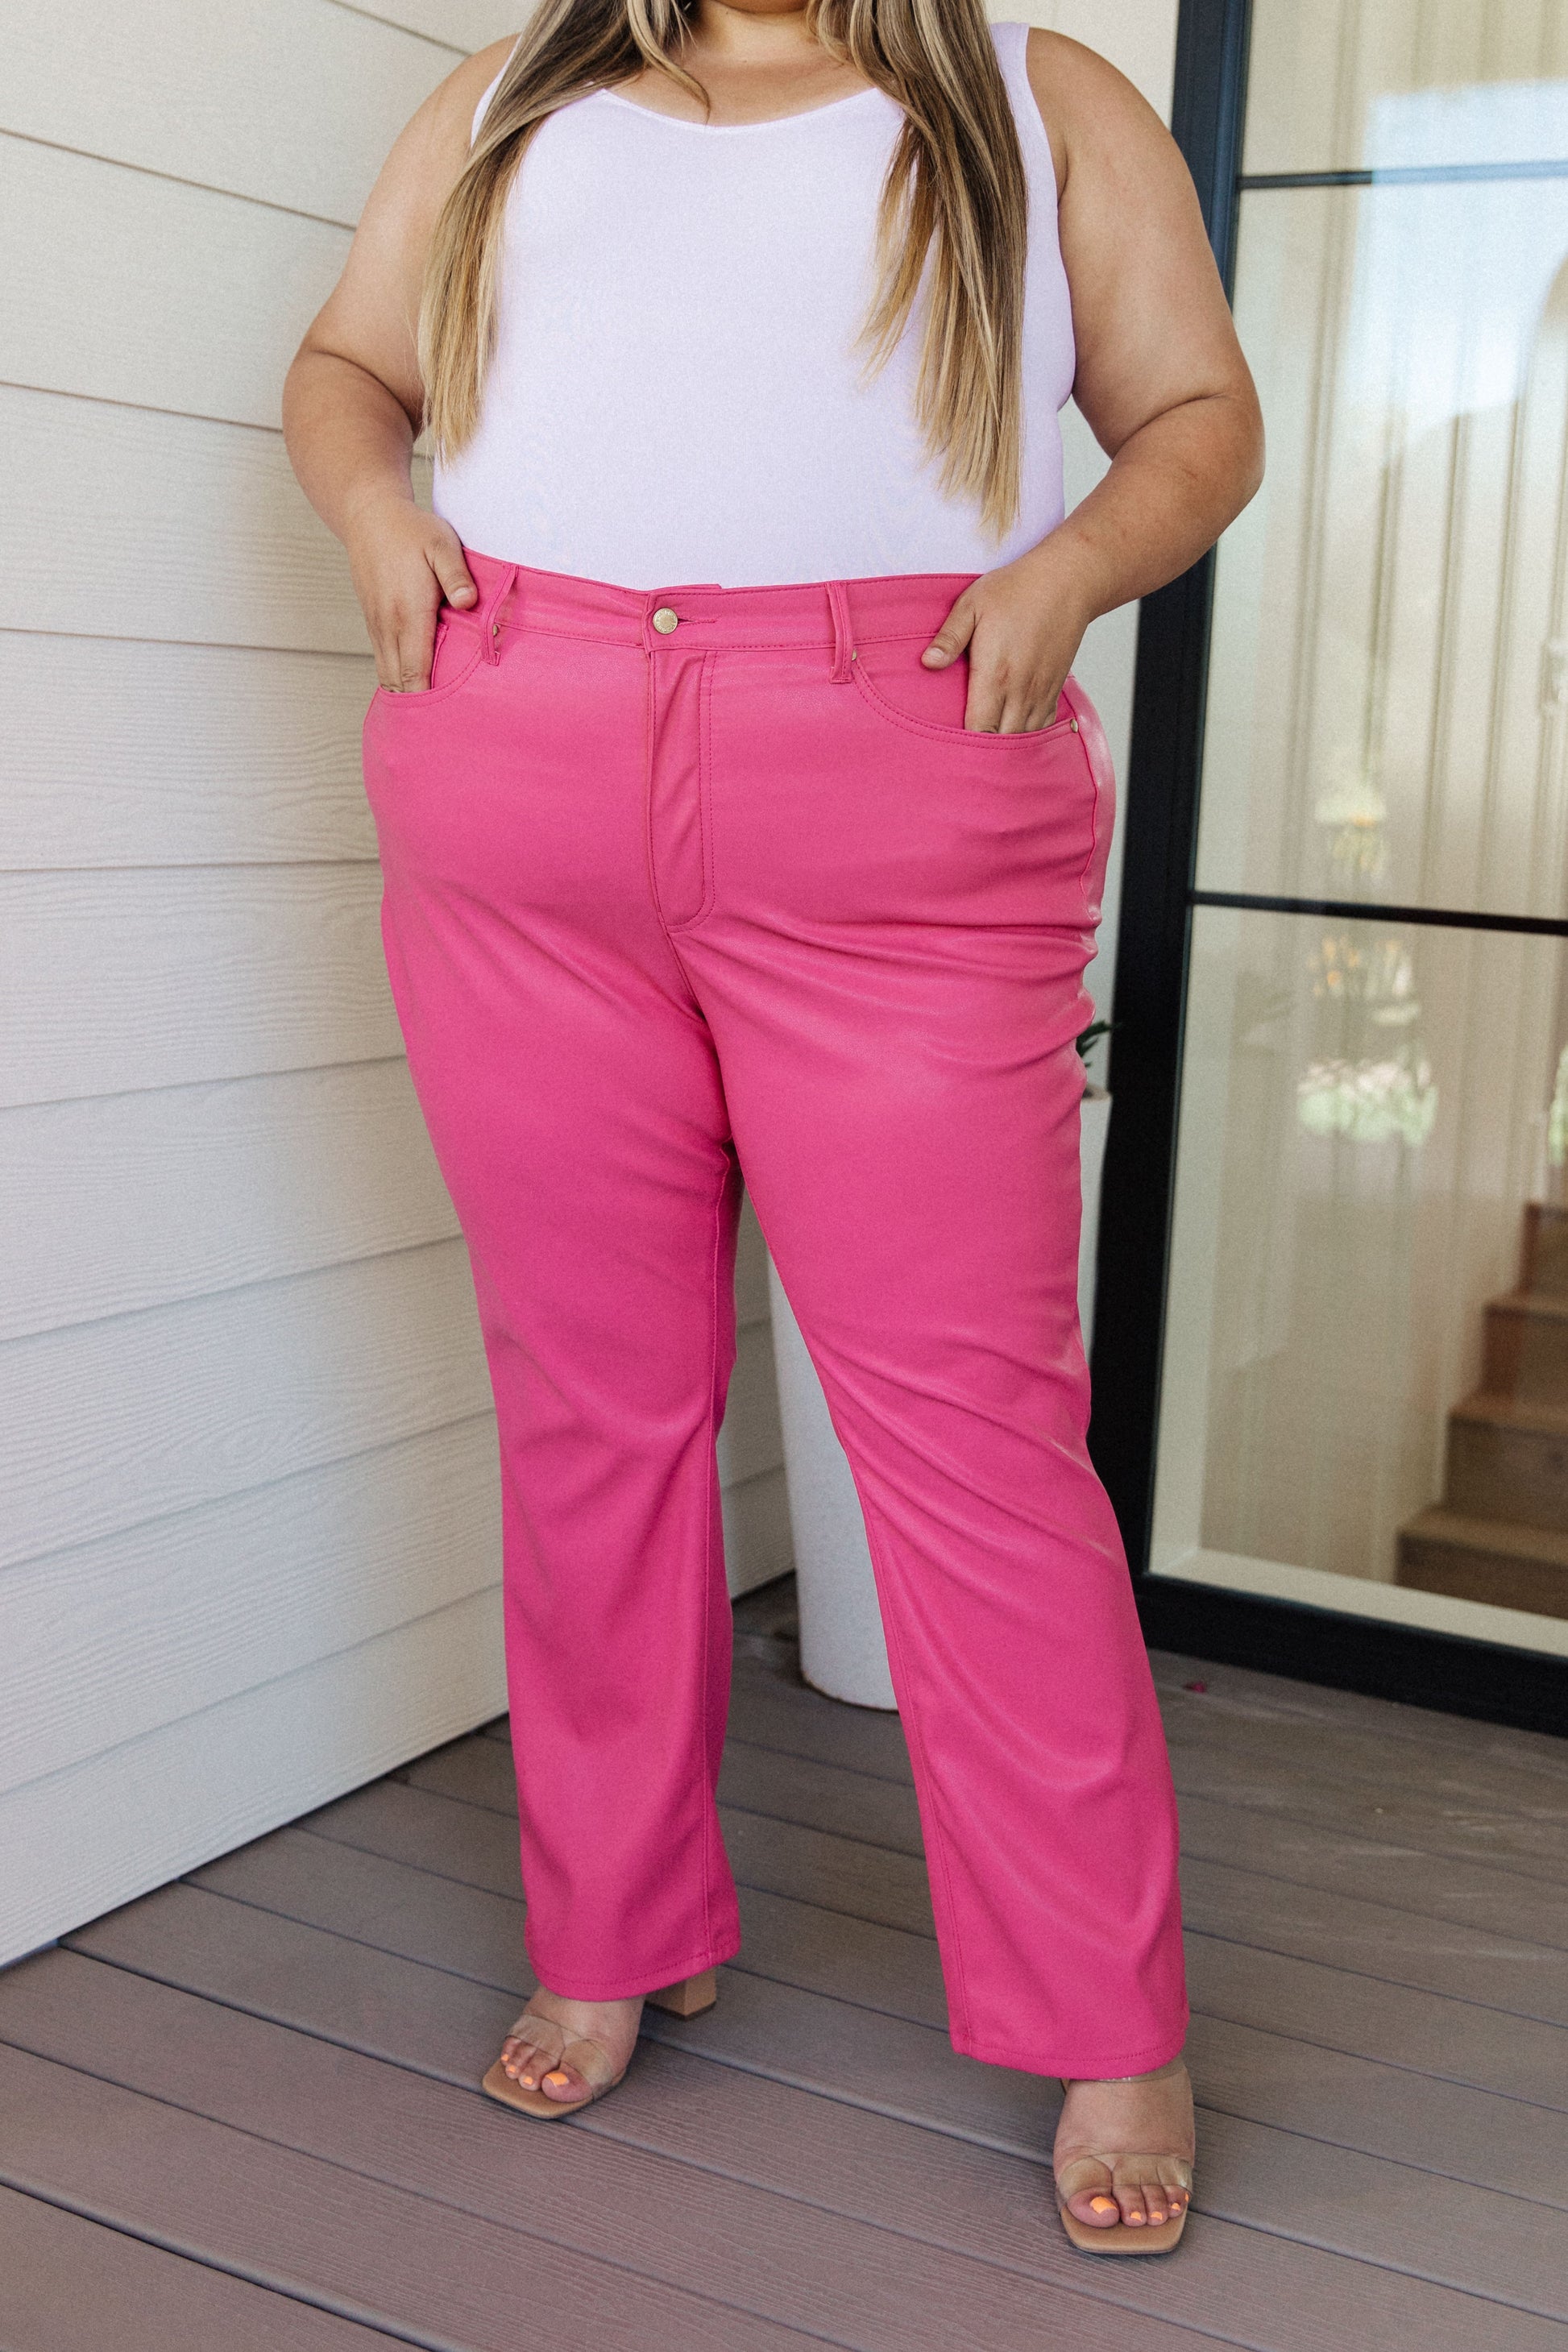 Tanya Control Top Faux Leather Pants in Hot Pink - FamFancy Boutique